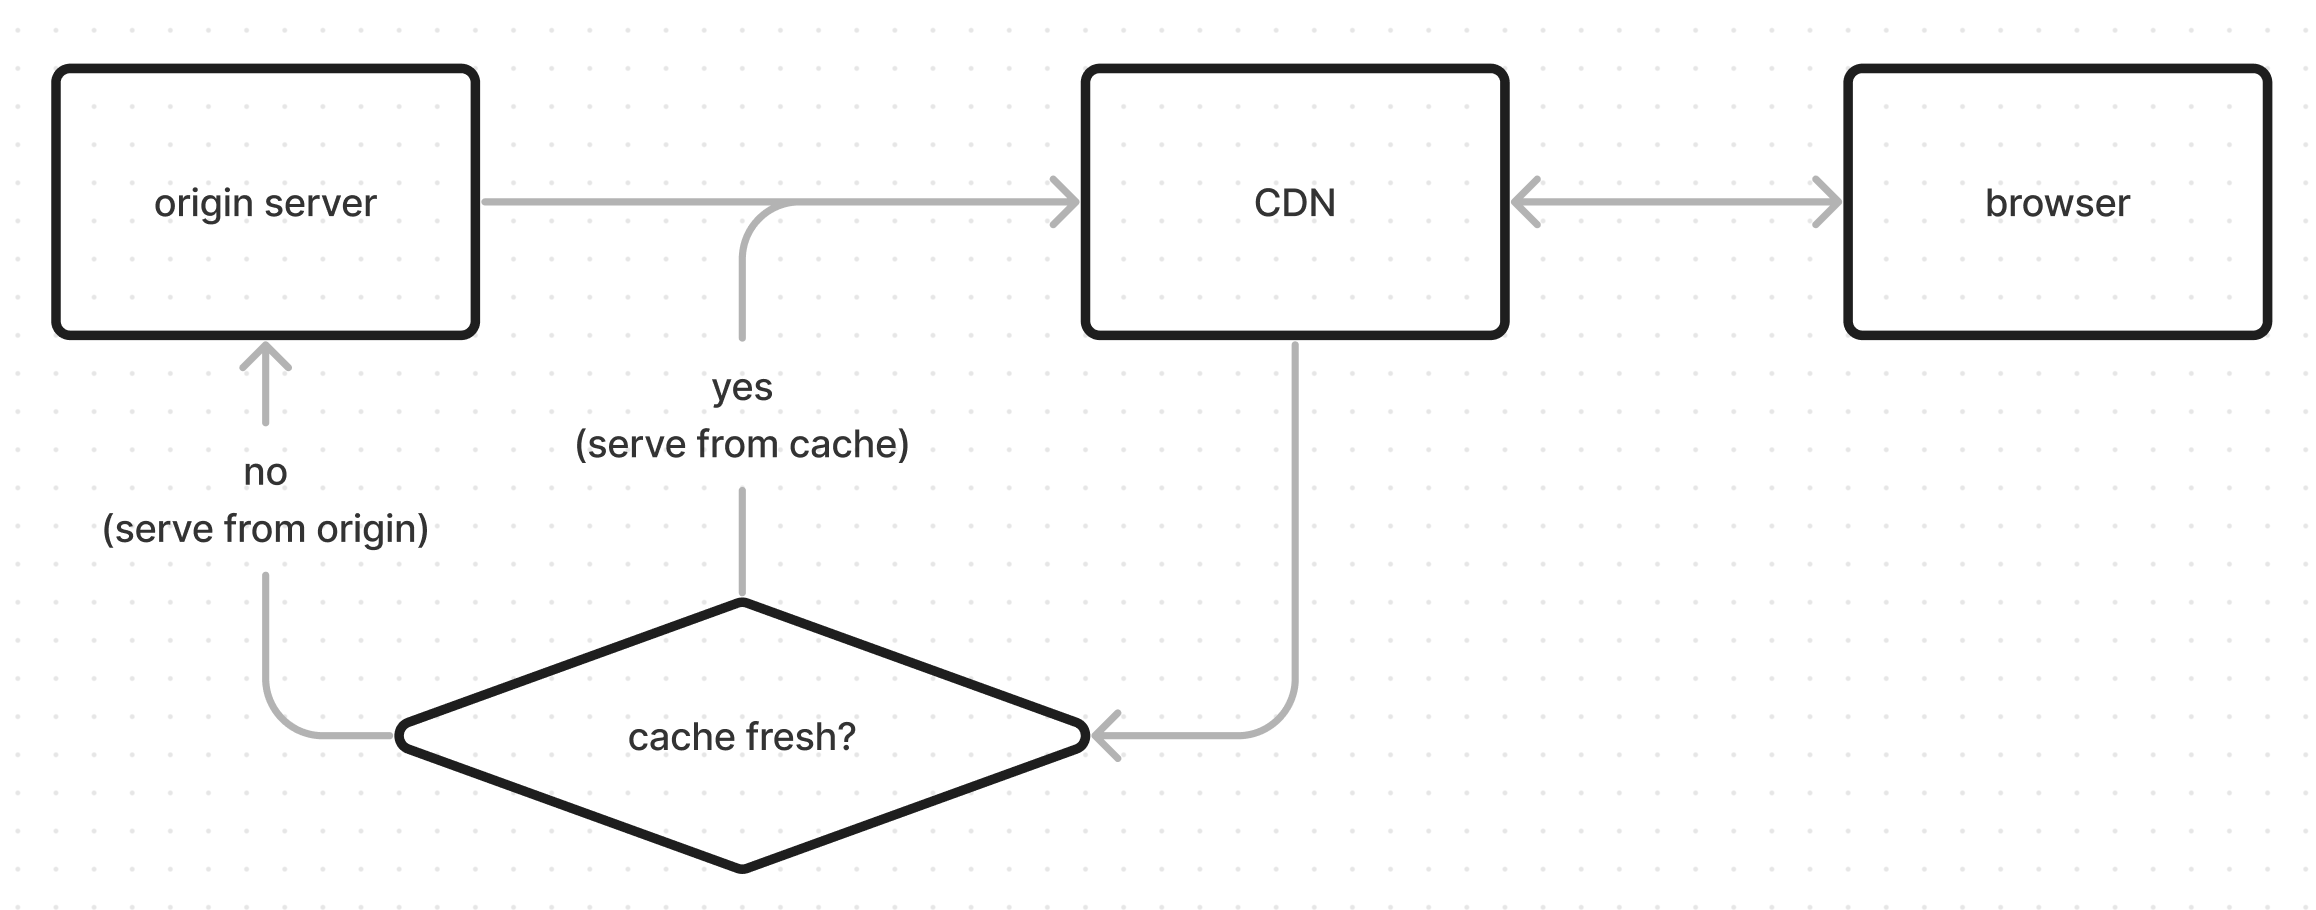 flow chart for typical caching strategy